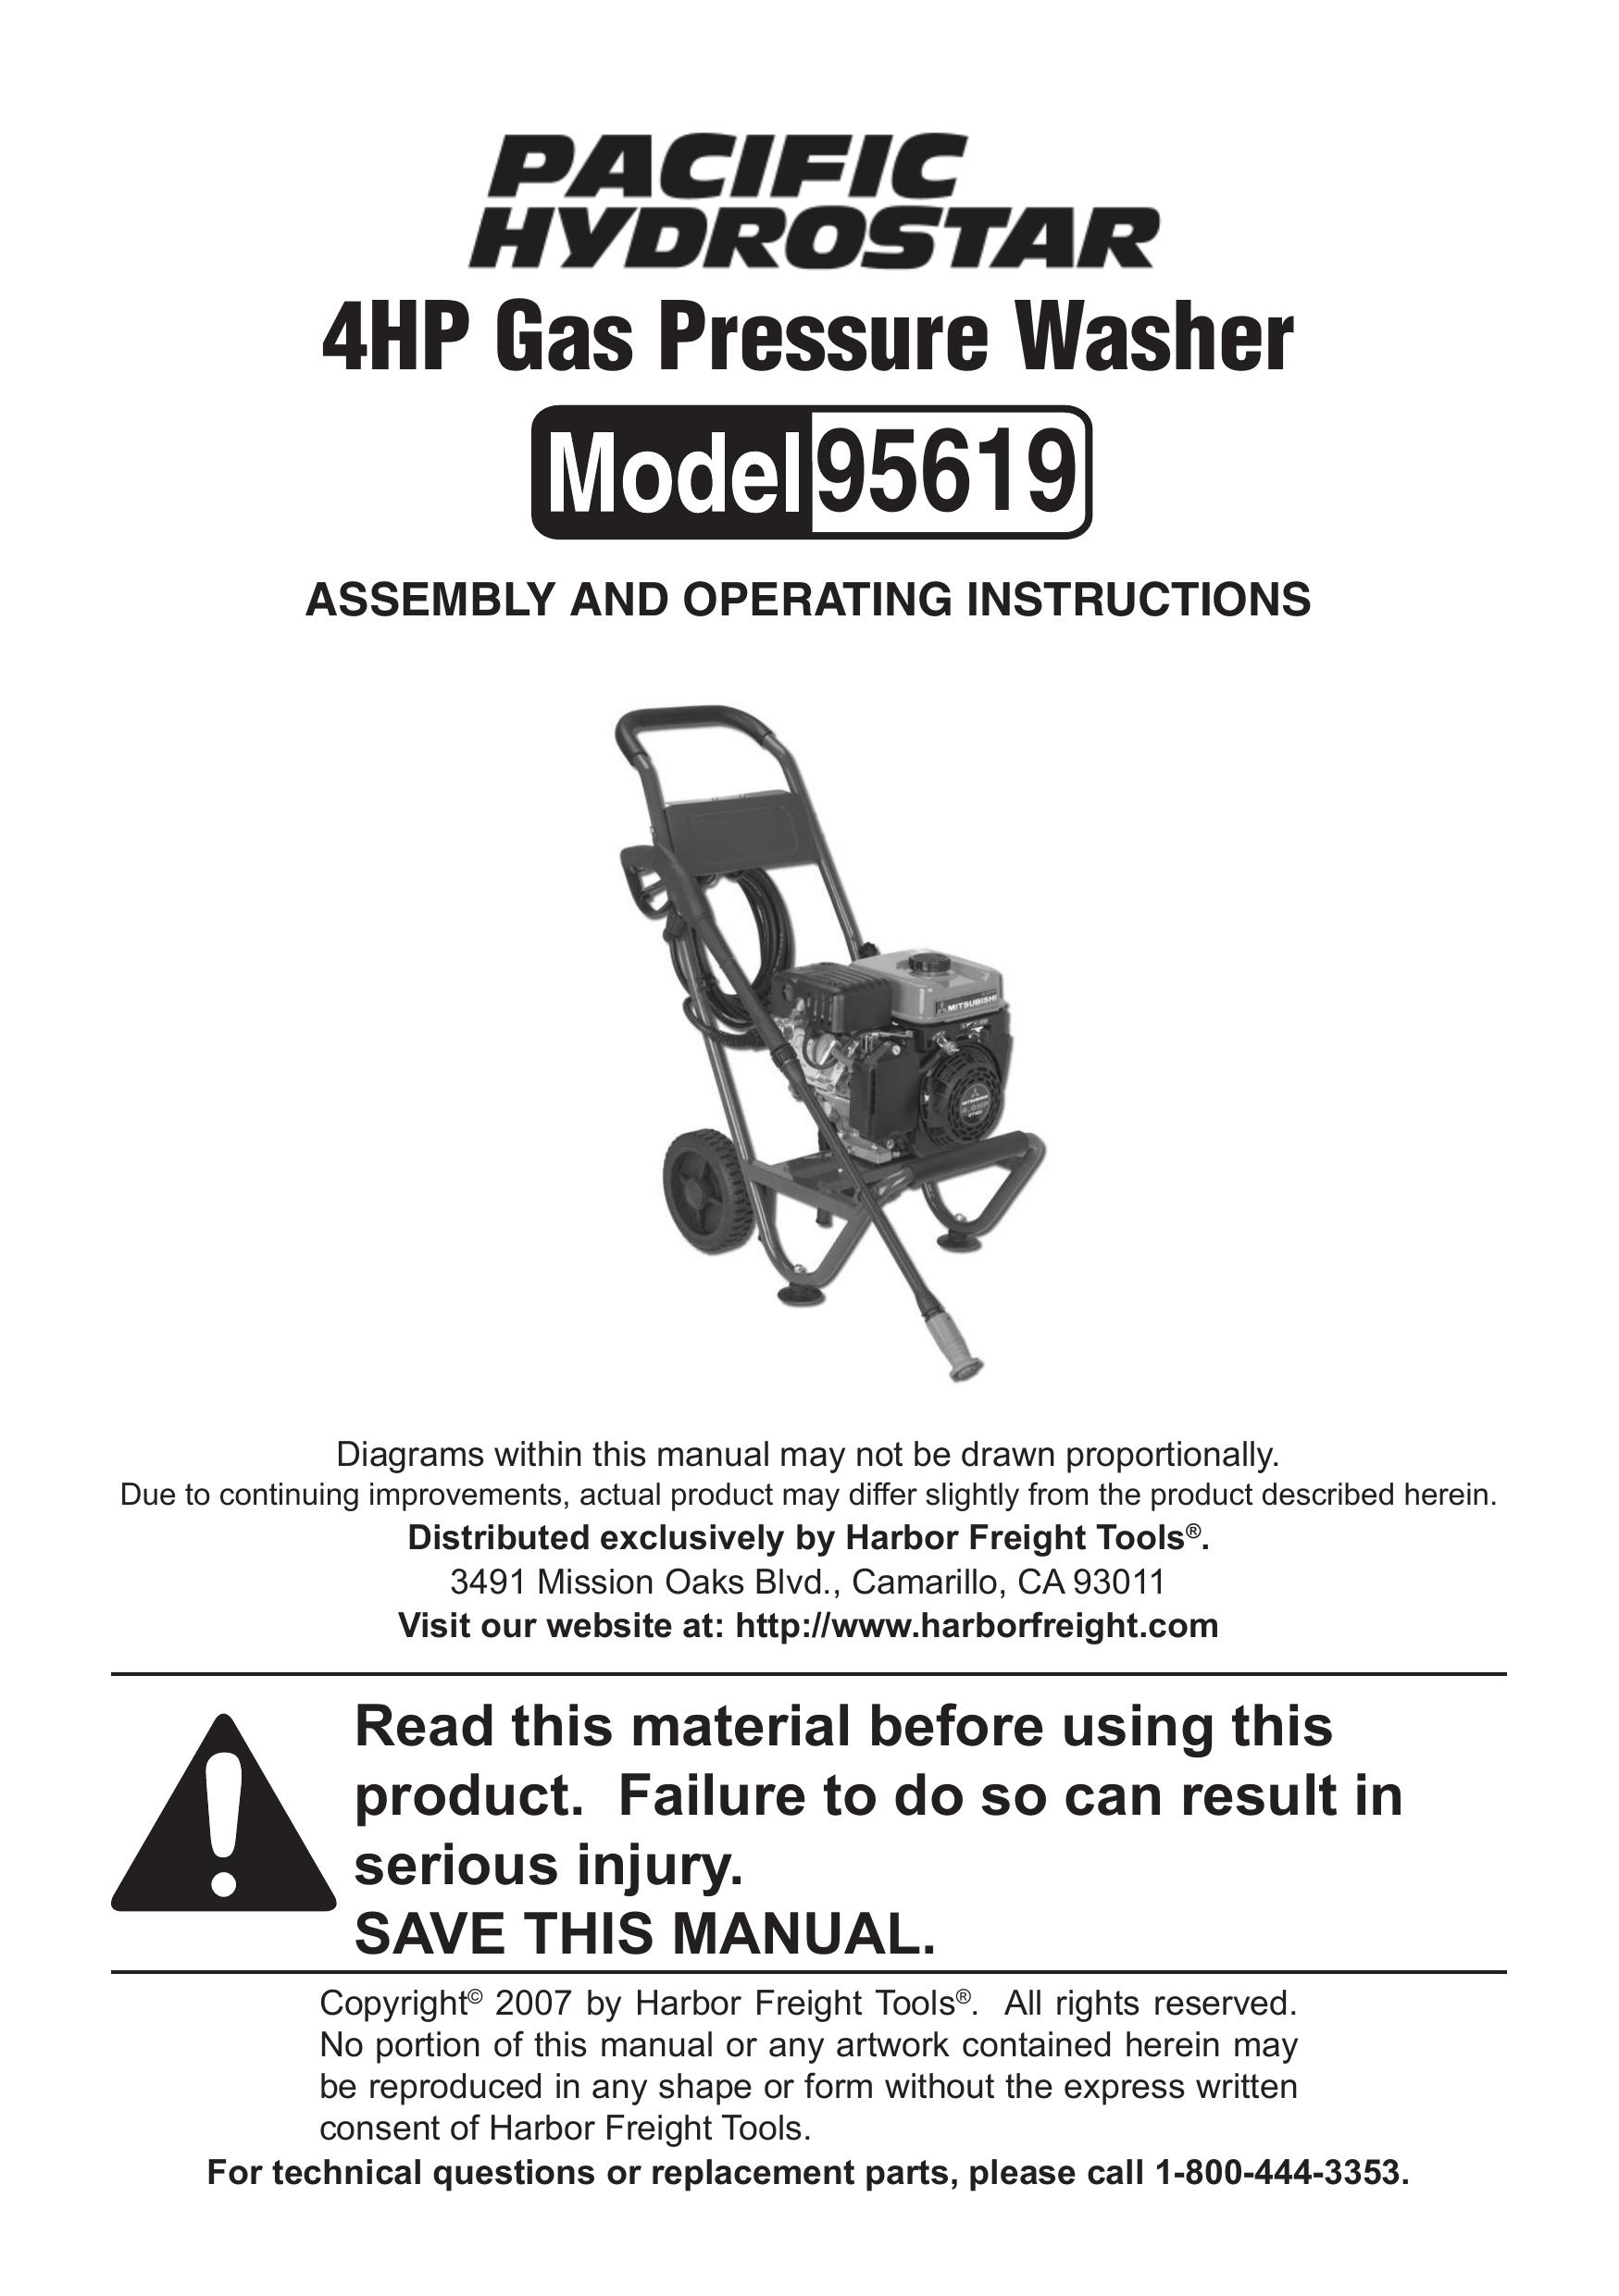 Harbor Freight Tools 95619 Pressure Washer User Manual